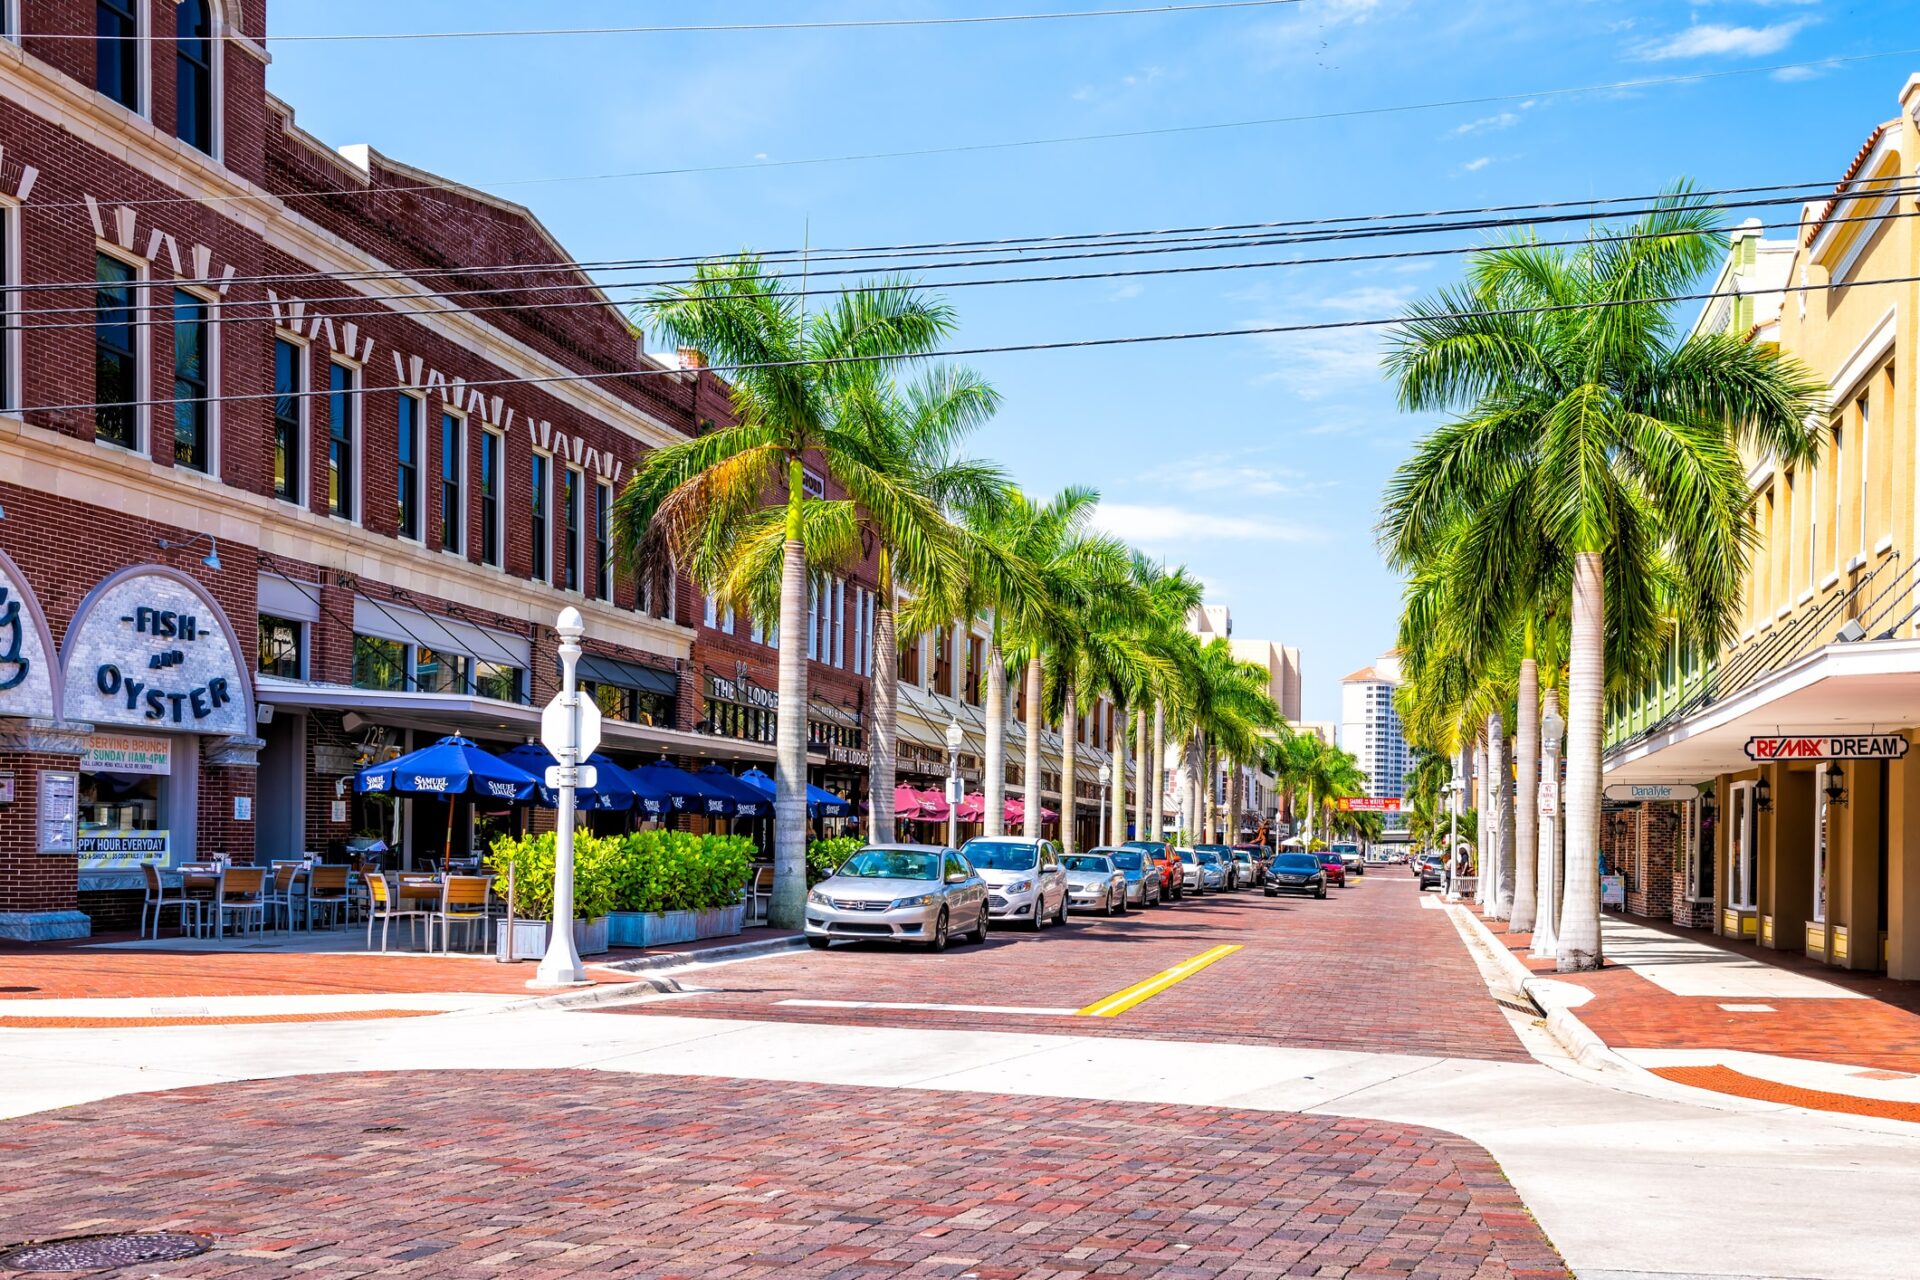 What Is the Value of Beginning an LLC in Florida?